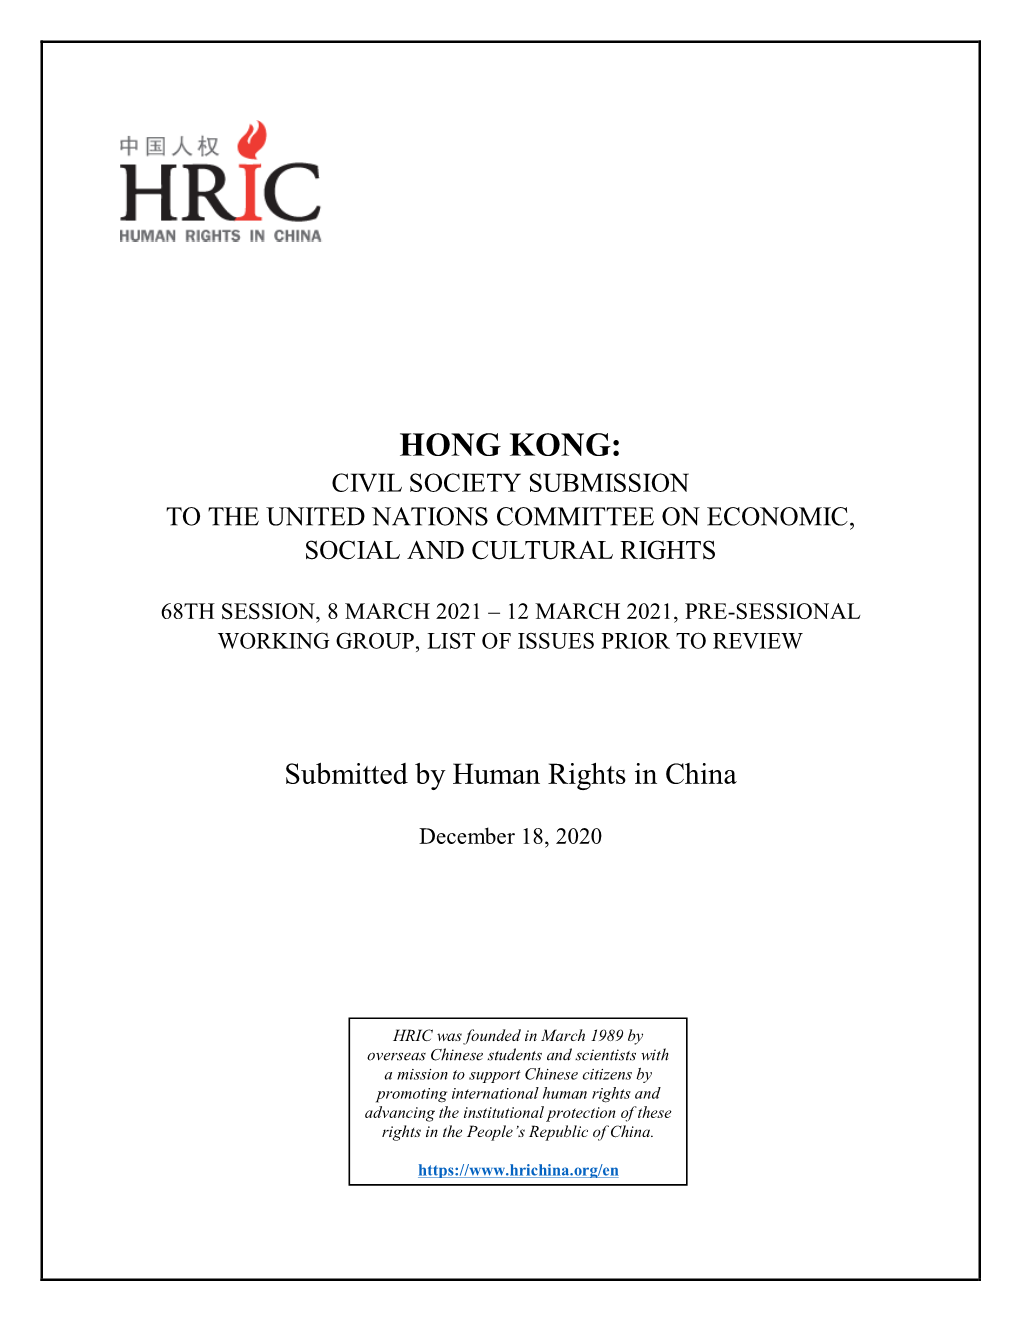 Hong Kong: Civil Society Submission to the United Nations Committee on Economic, Social and Cultural Rights